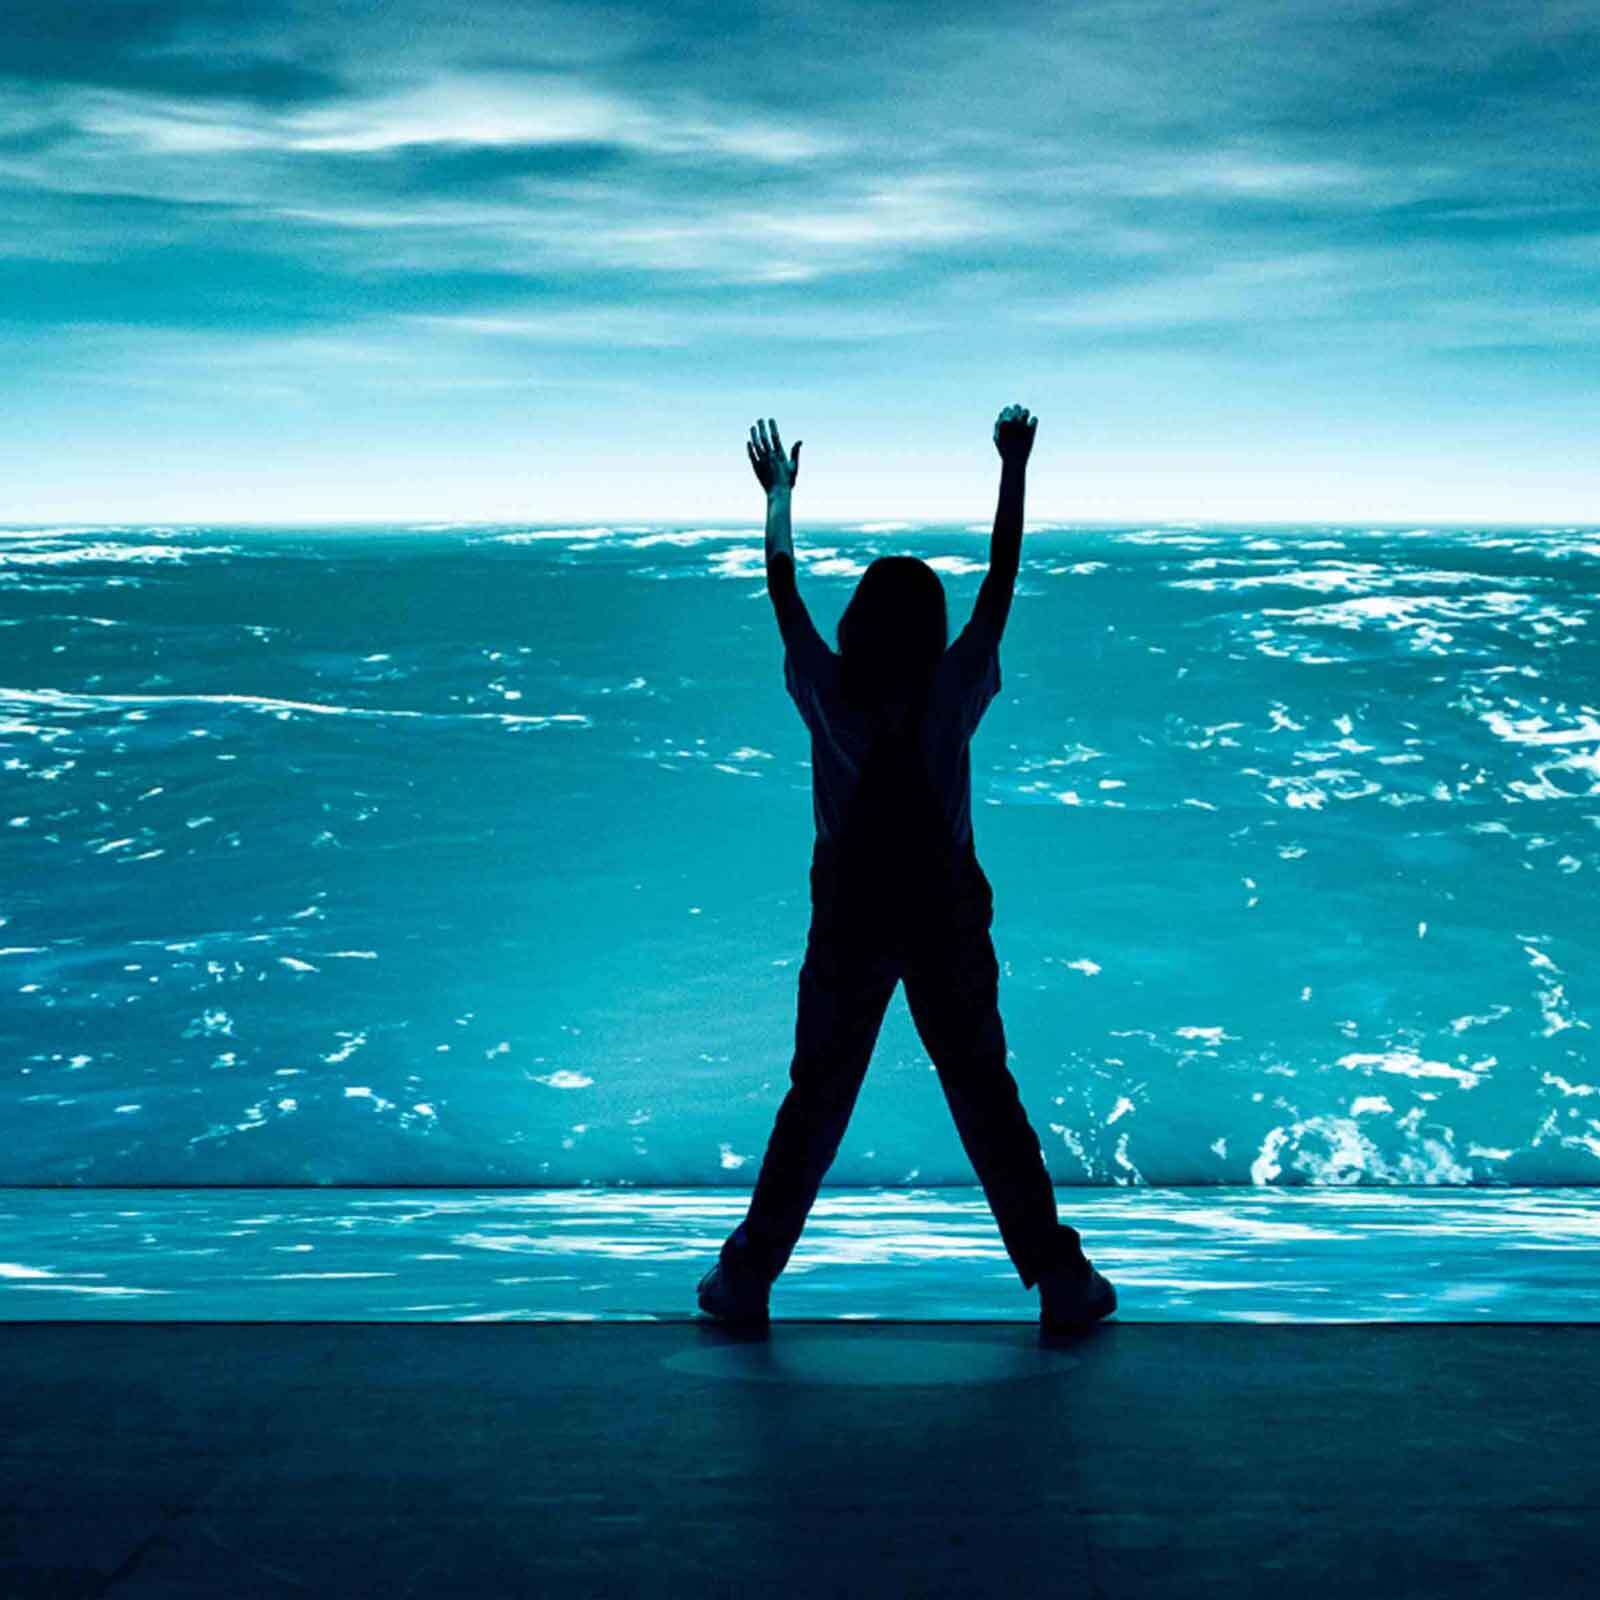 Person standing in silhouette with arms raised against a stunning blue ocean background.